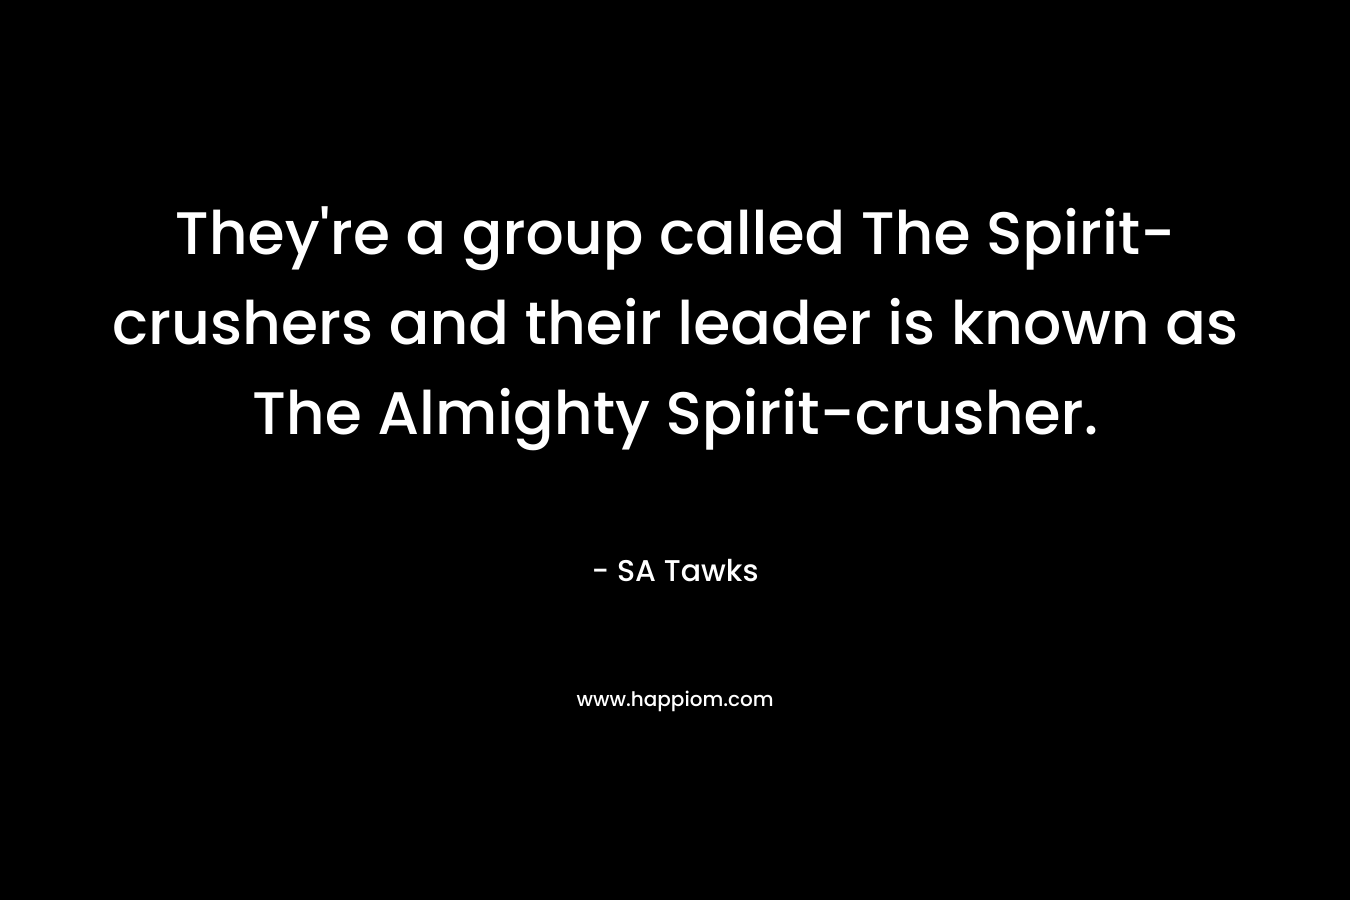 They're a group called The Spirit-crushers and their leader is known as The Almighty Spirit-crusher.